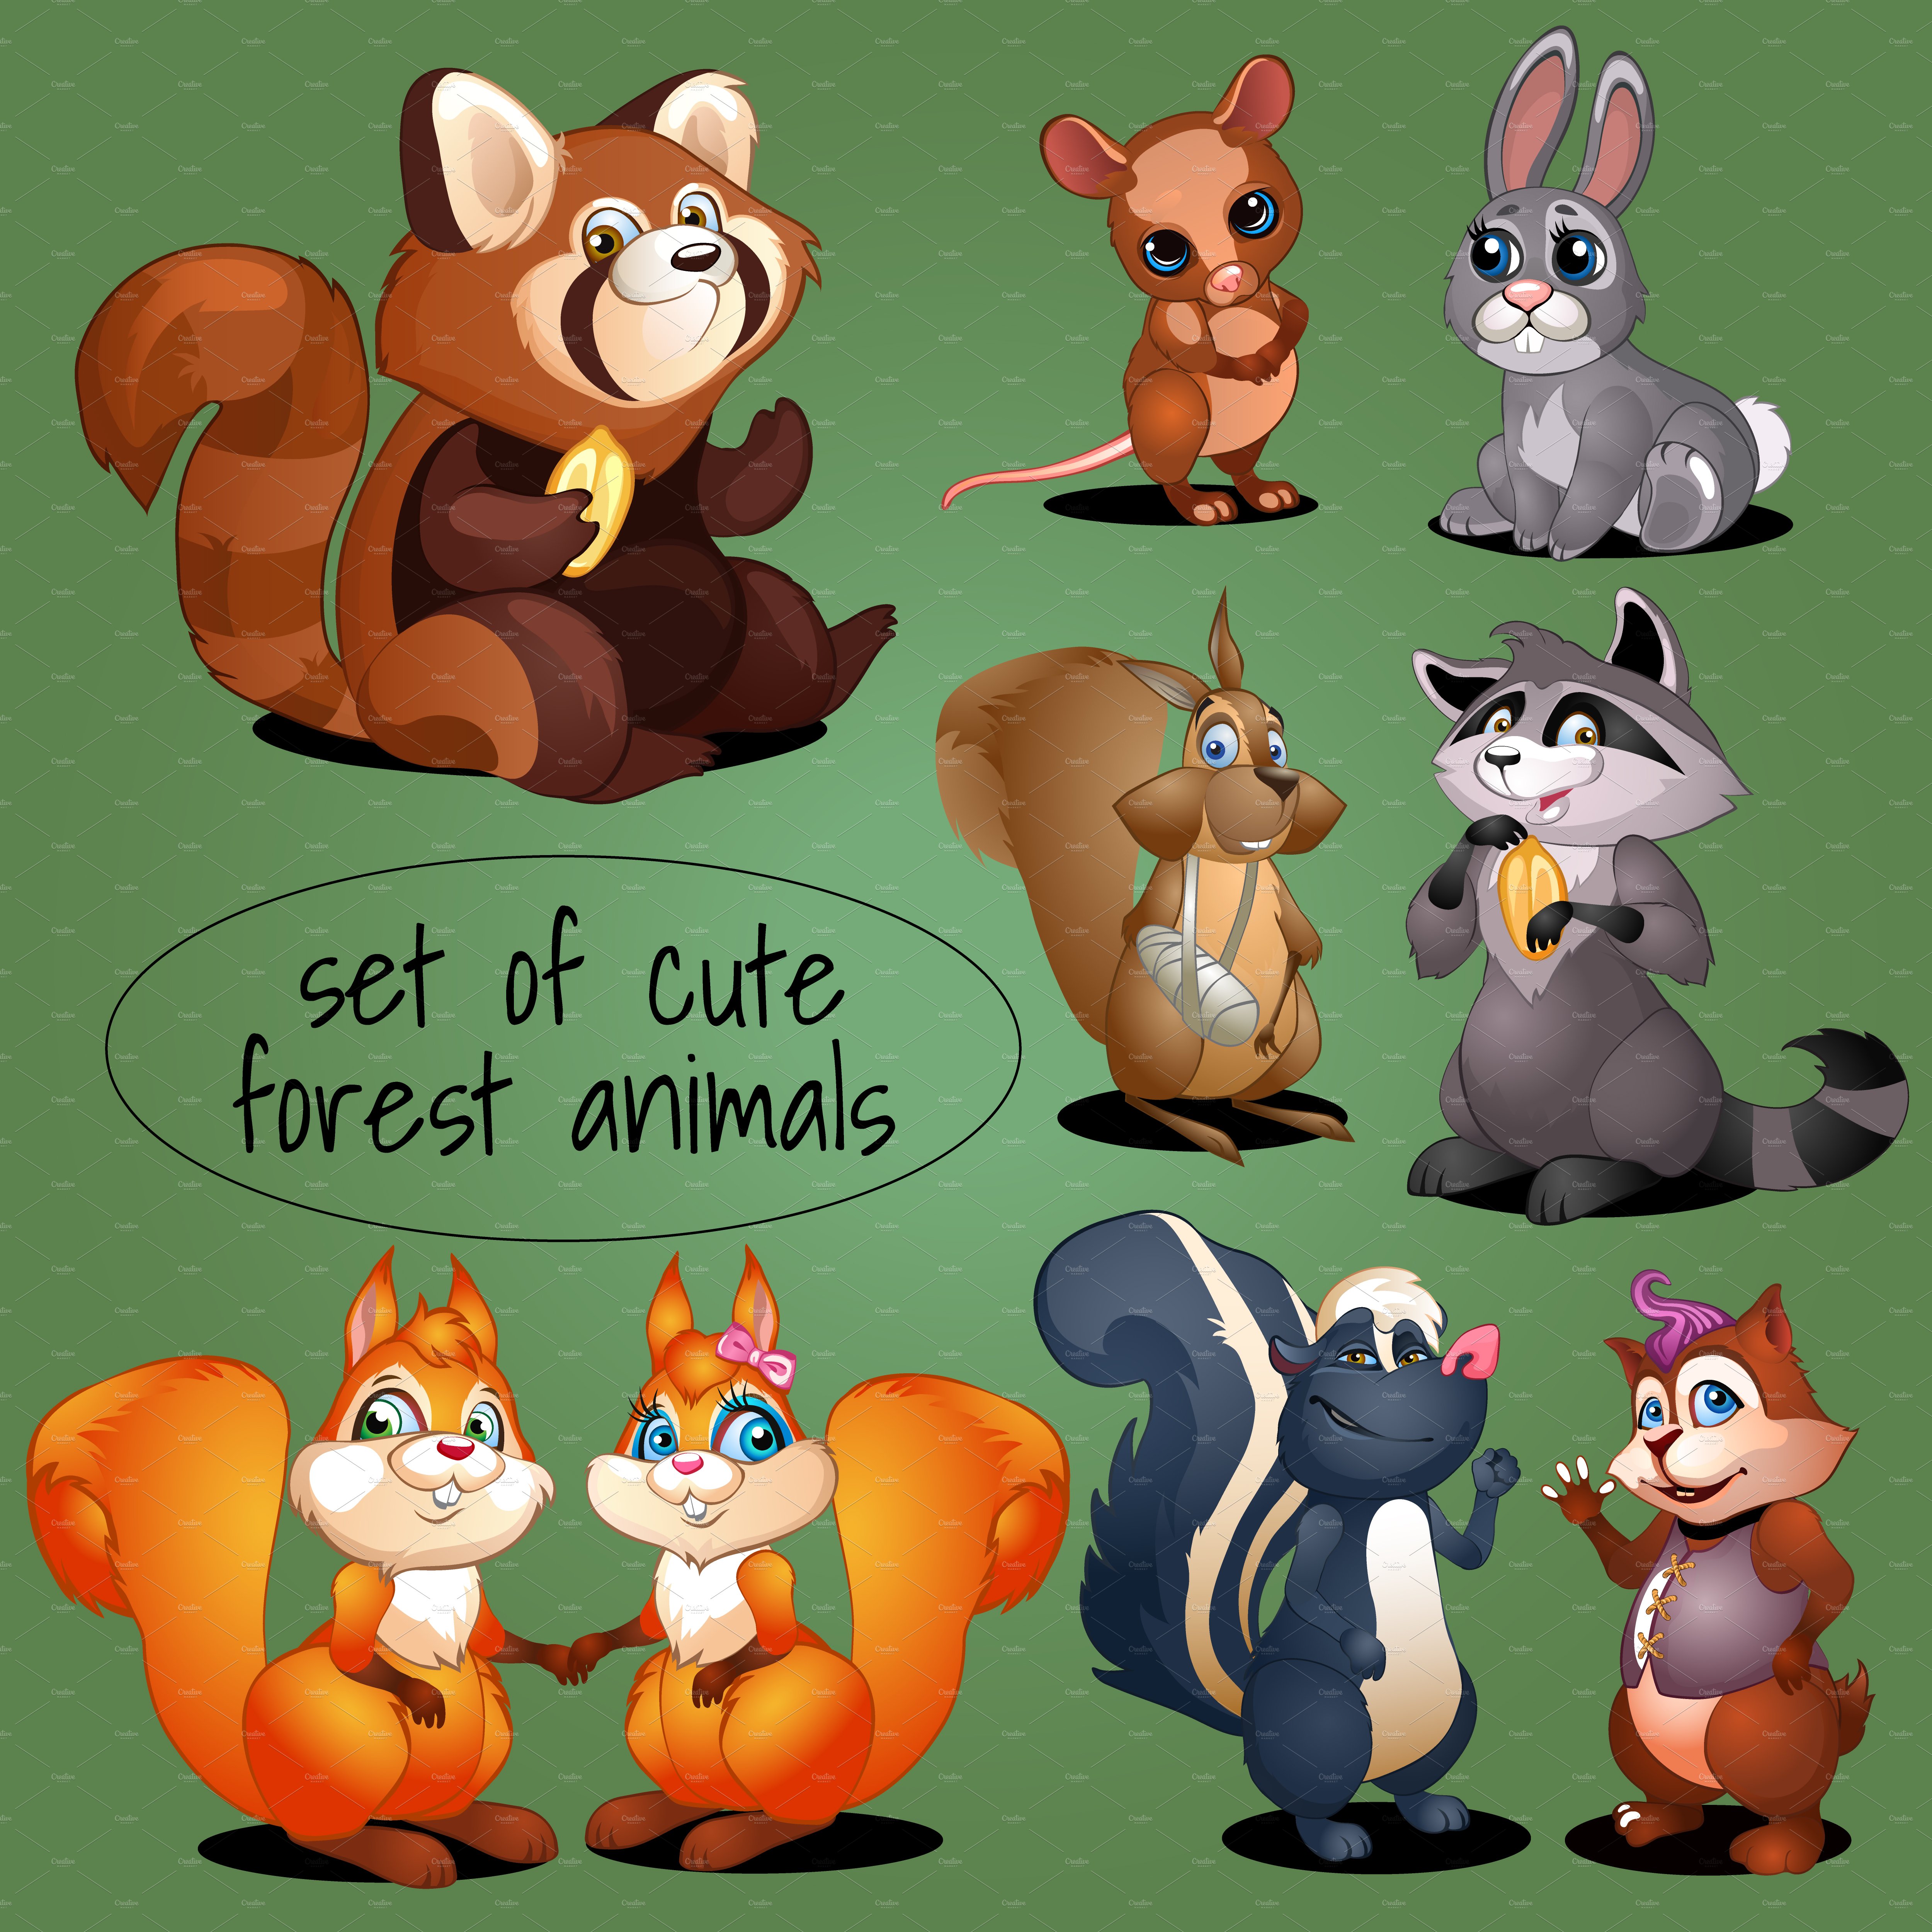 Set of adorable woodland creatures cover image.